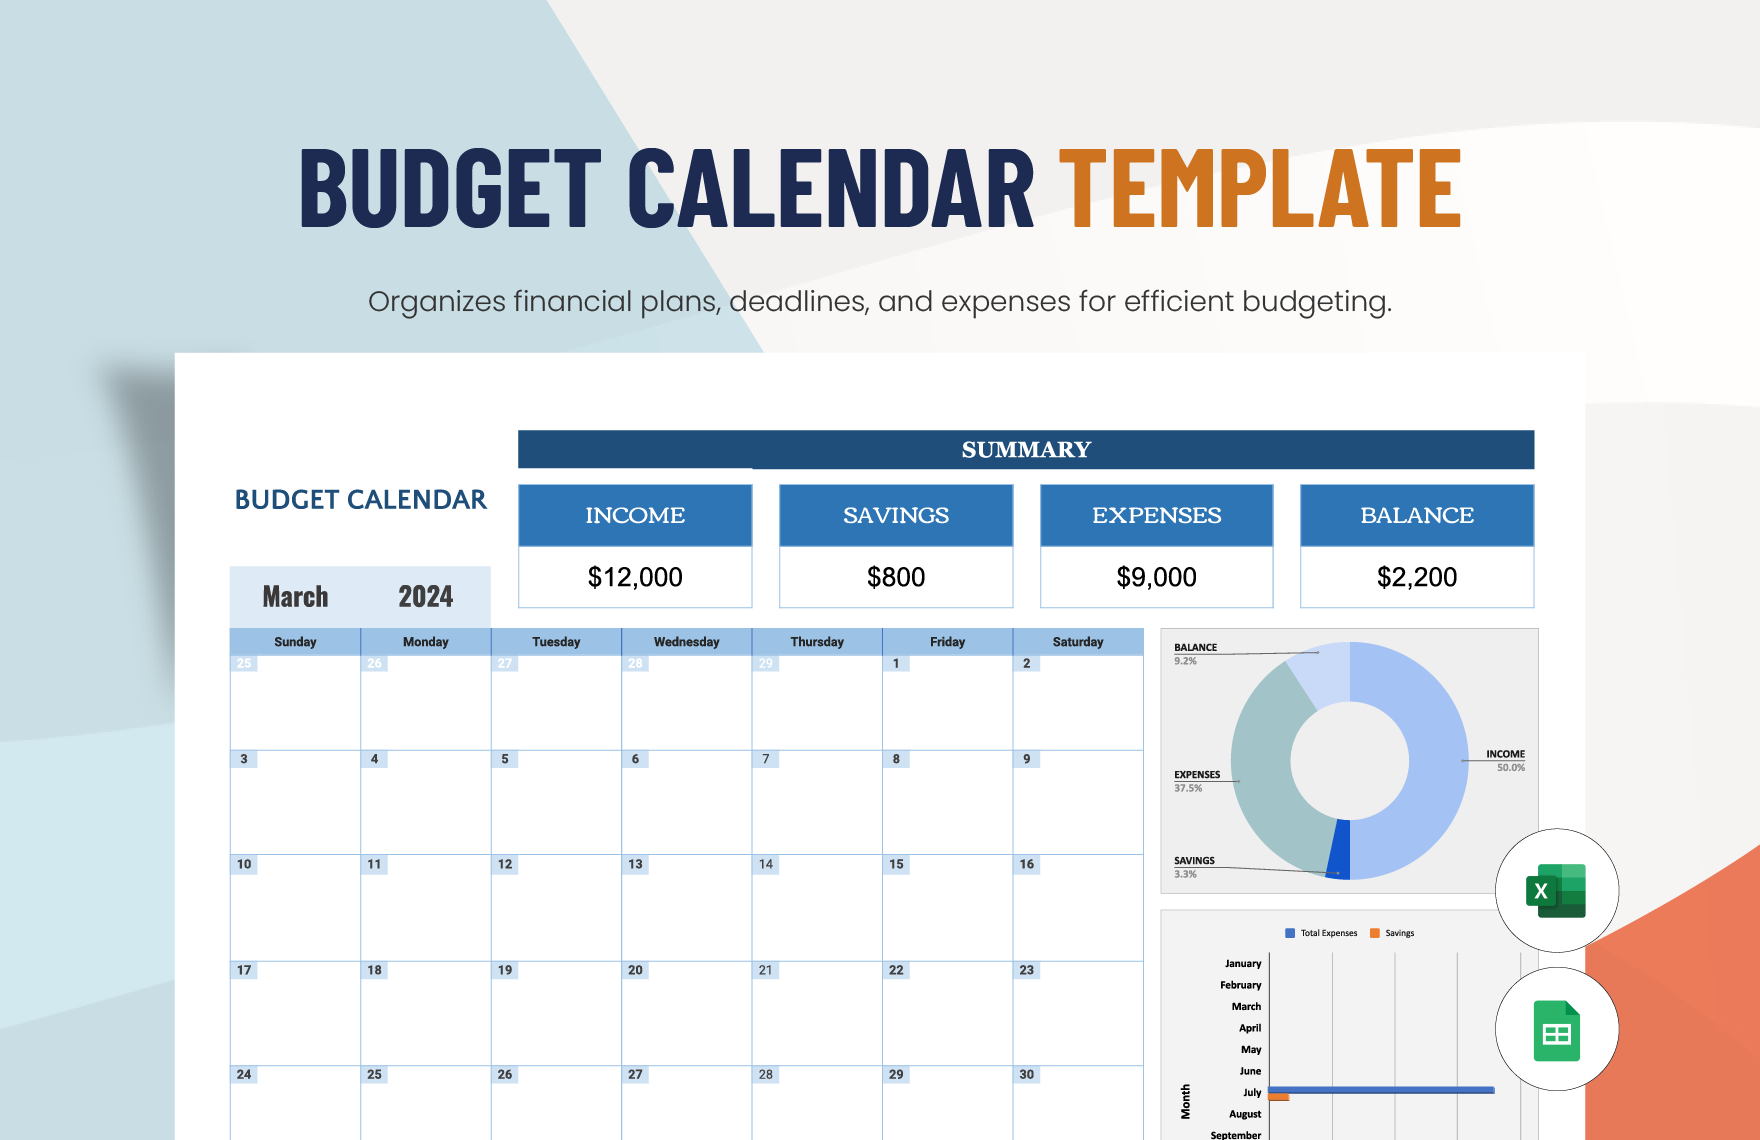 Budget Calendar Template in Excel, Google Sheets